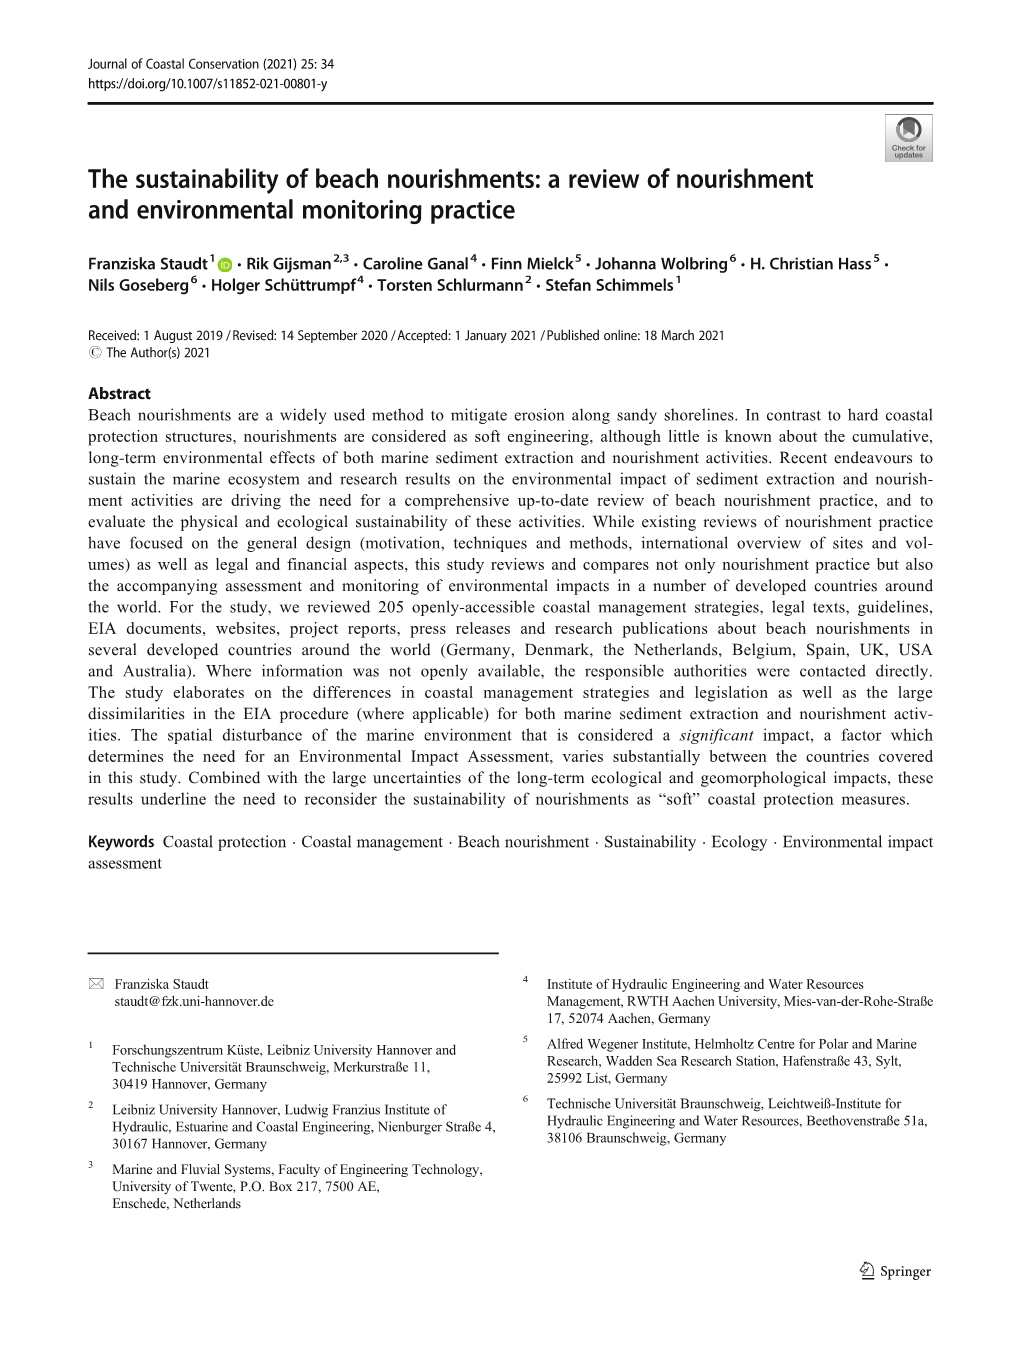 The Sustainability of Beach Nourishments: a Review of Nourishment and Environmental Monitoring Practice